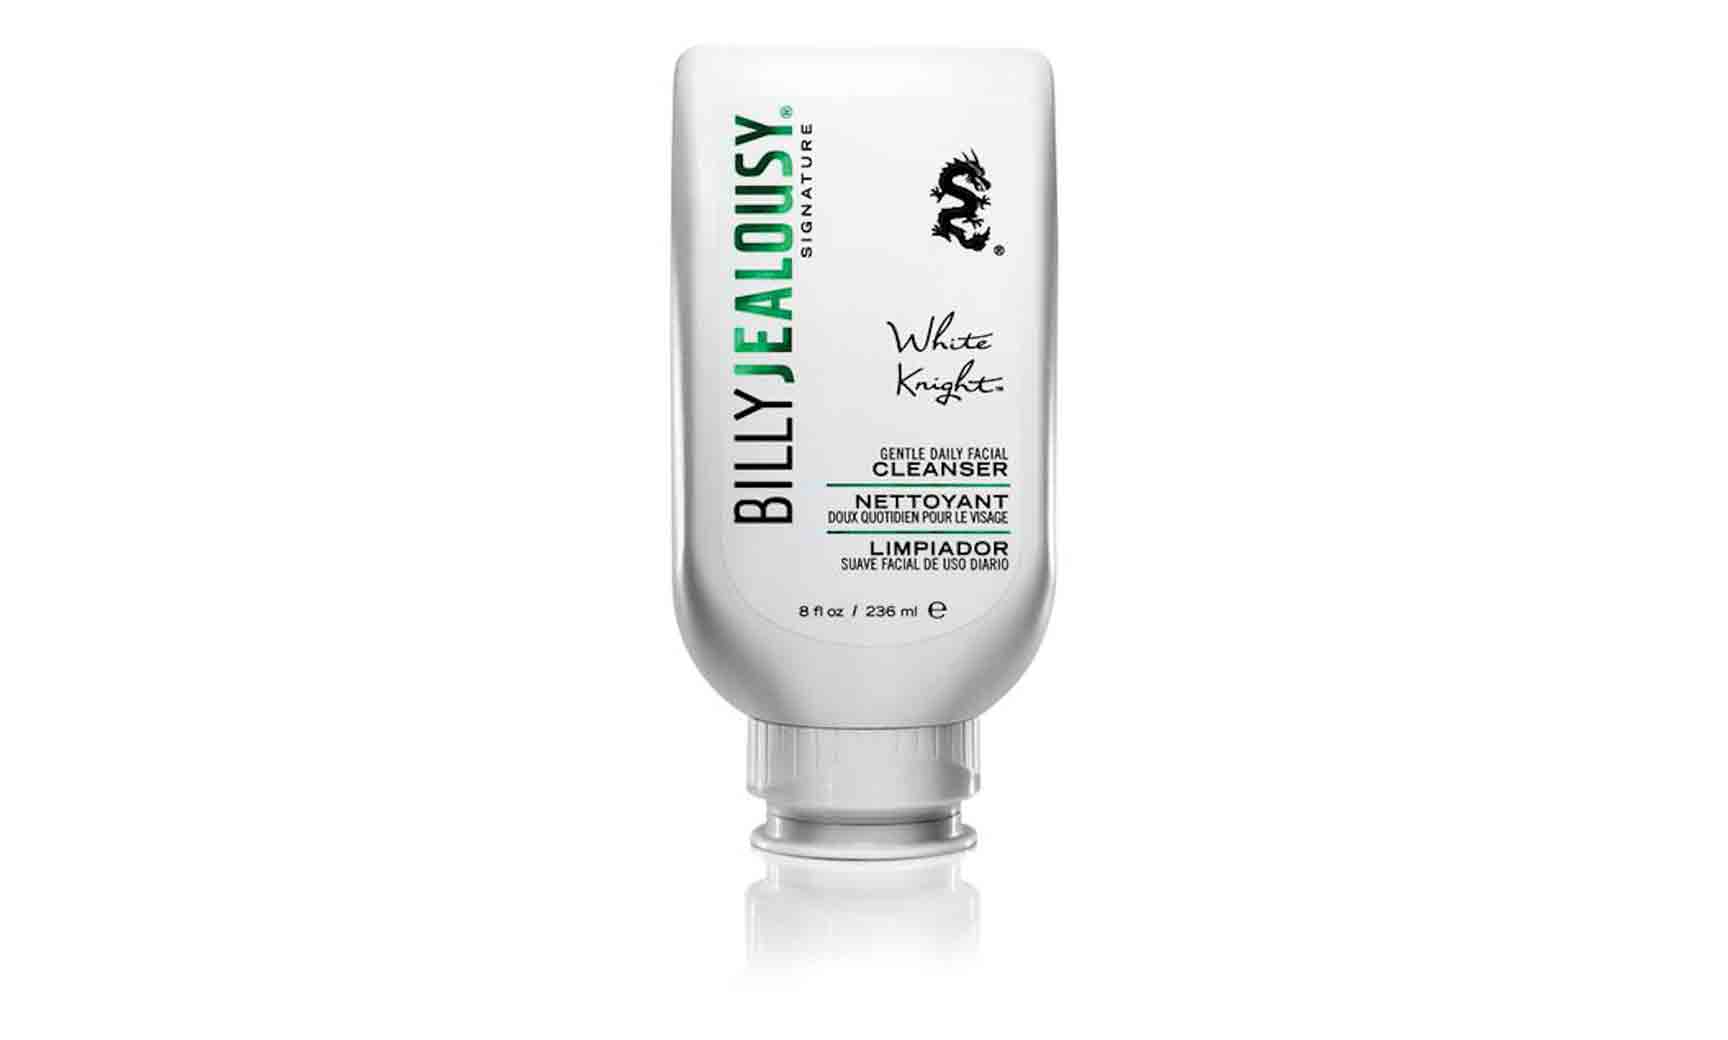 Billy Jealousy Signature White Knight Gentle Daily Facial Cleanser